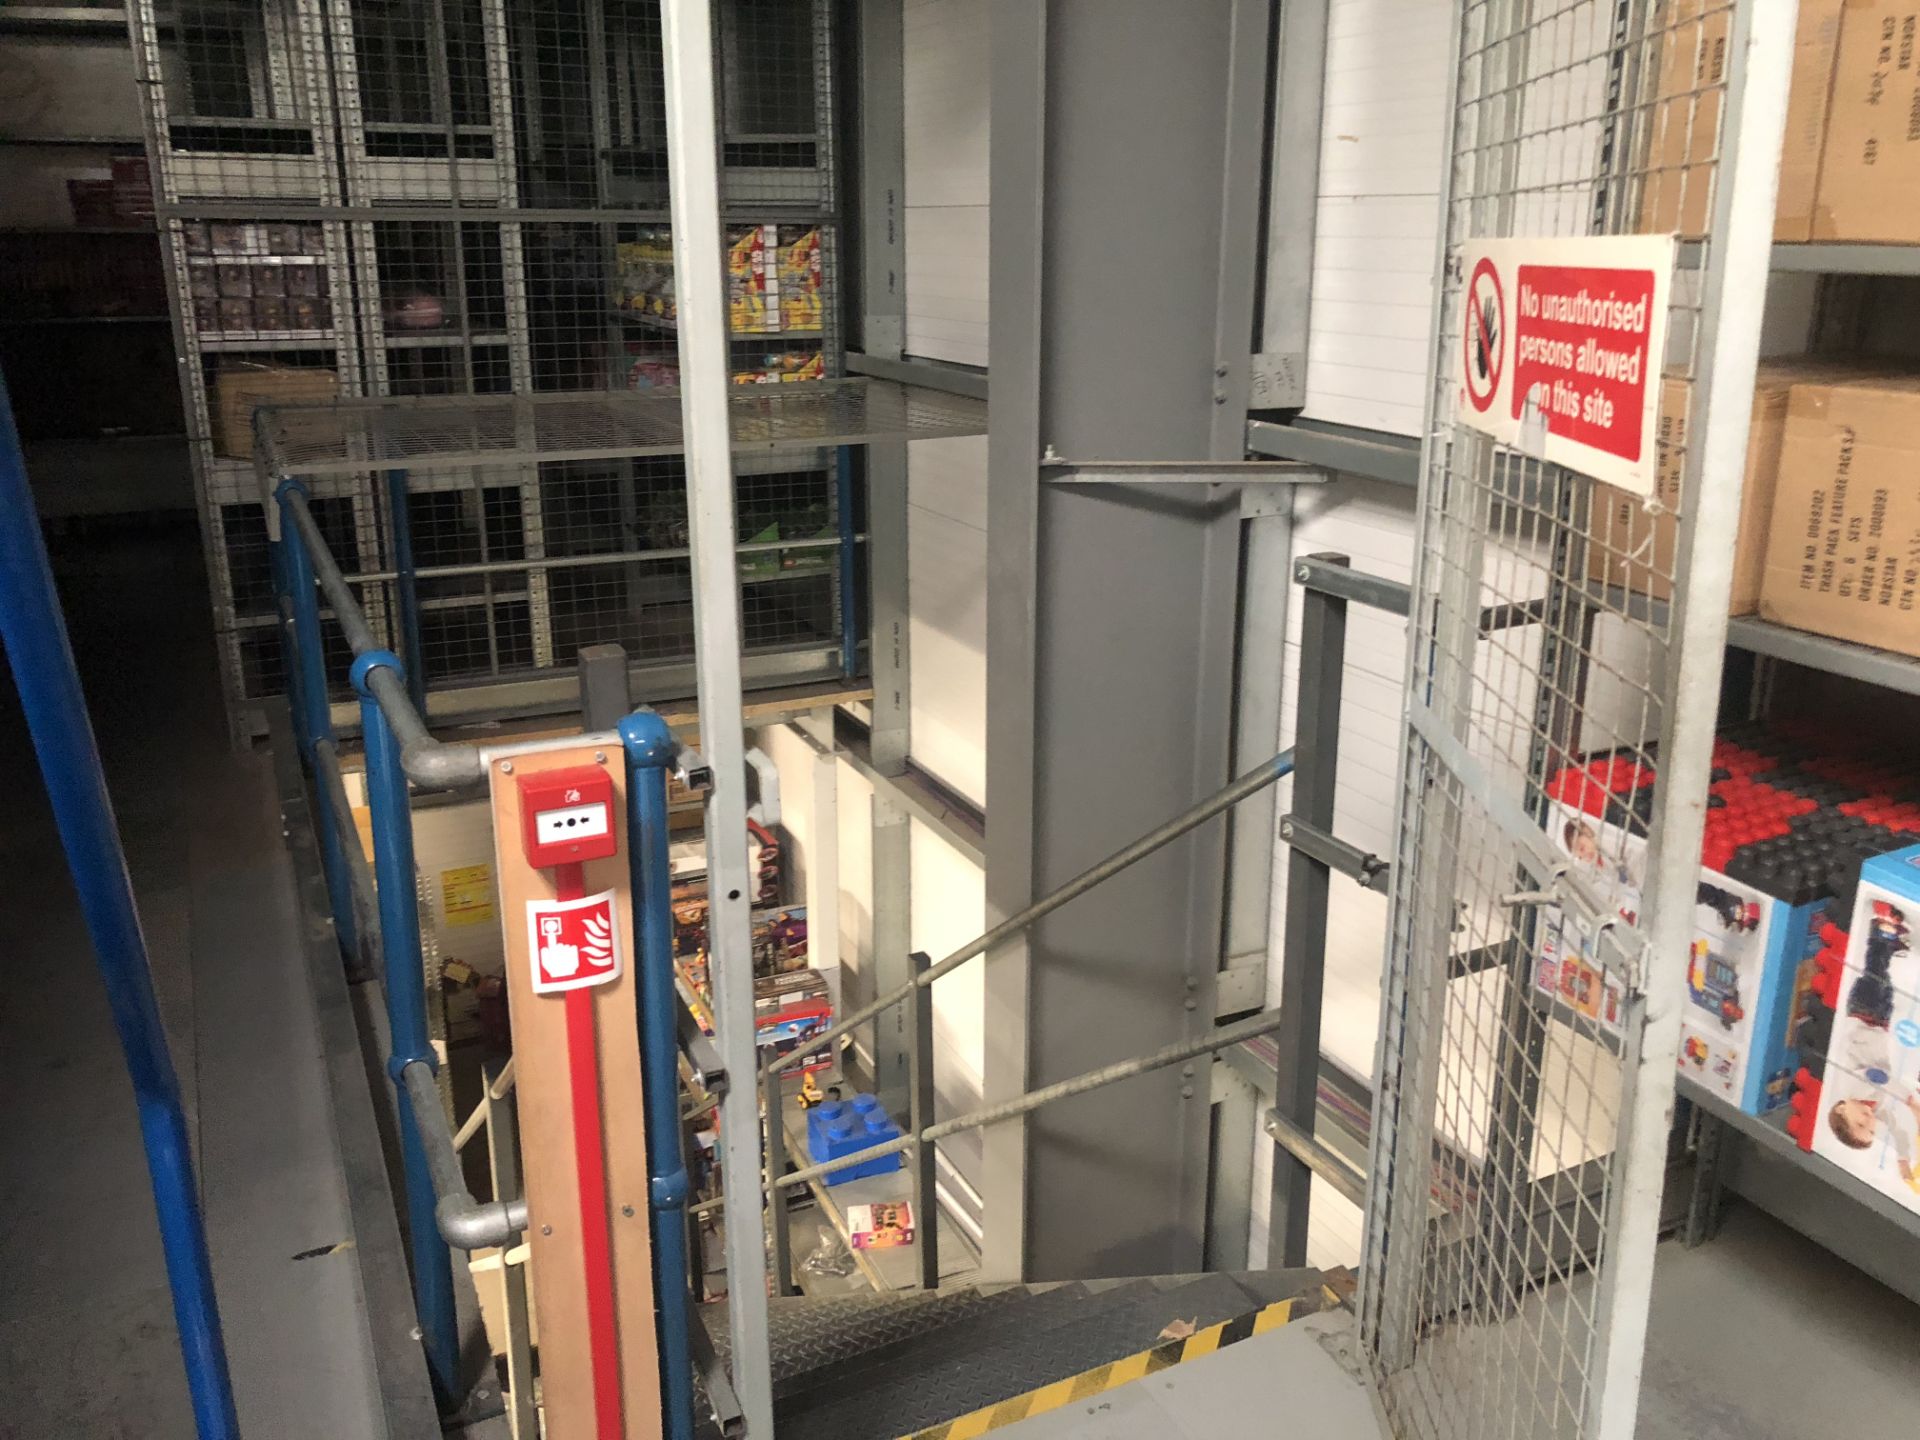 Mezzanine floor 19.7 x 19.4 m incl. 2 x pedestrian staircases, 2 x pallet safety cages, see more… - Image 6 of 7